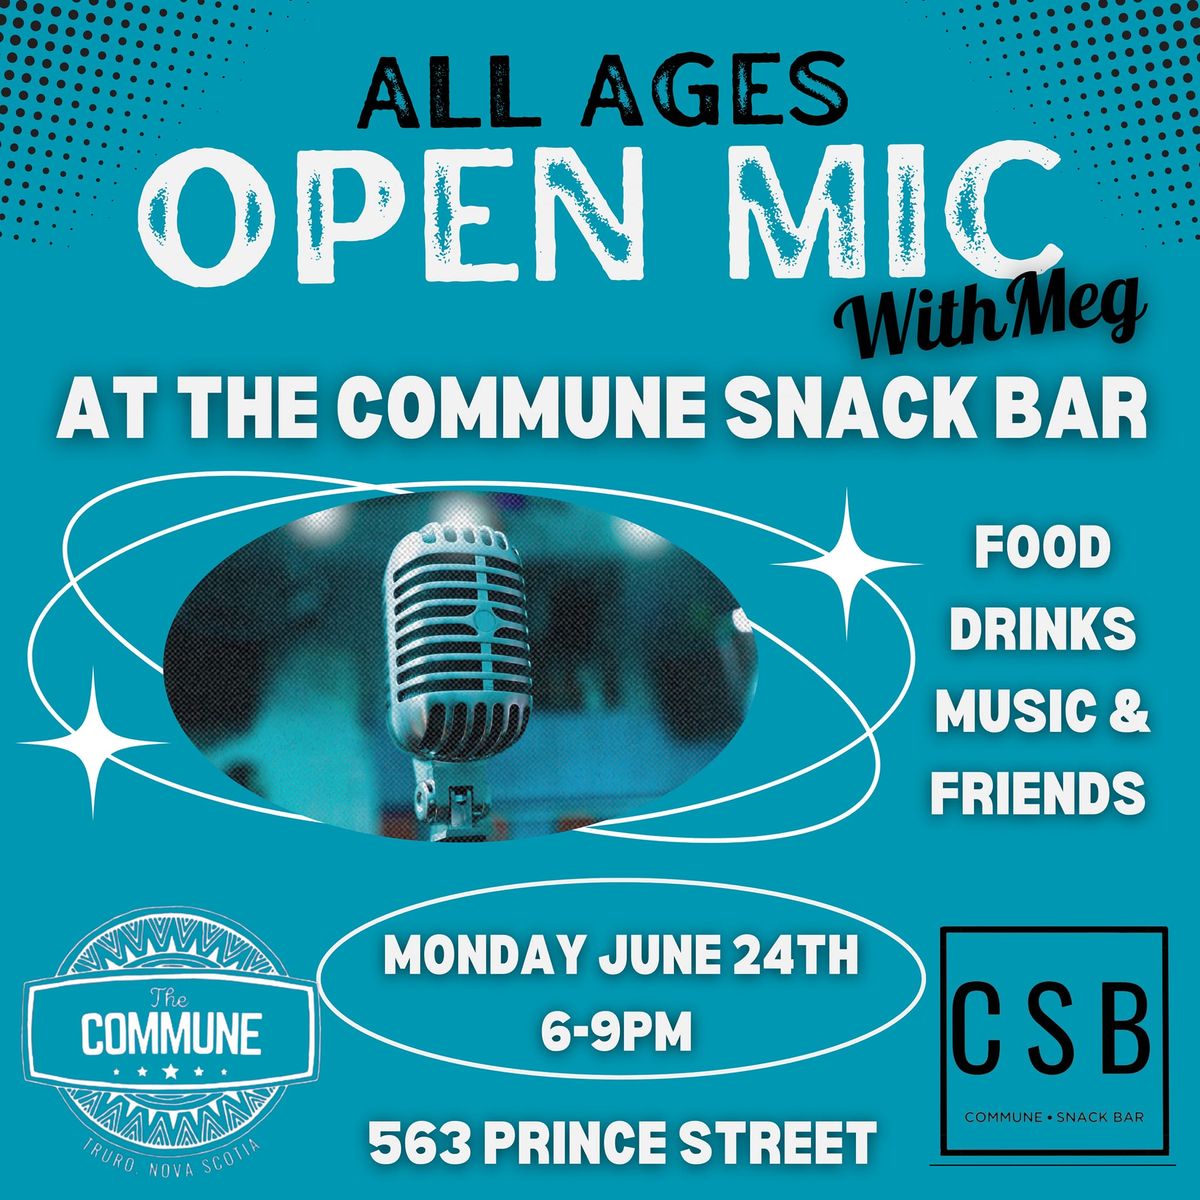 All Ages Open Mic at The Commune